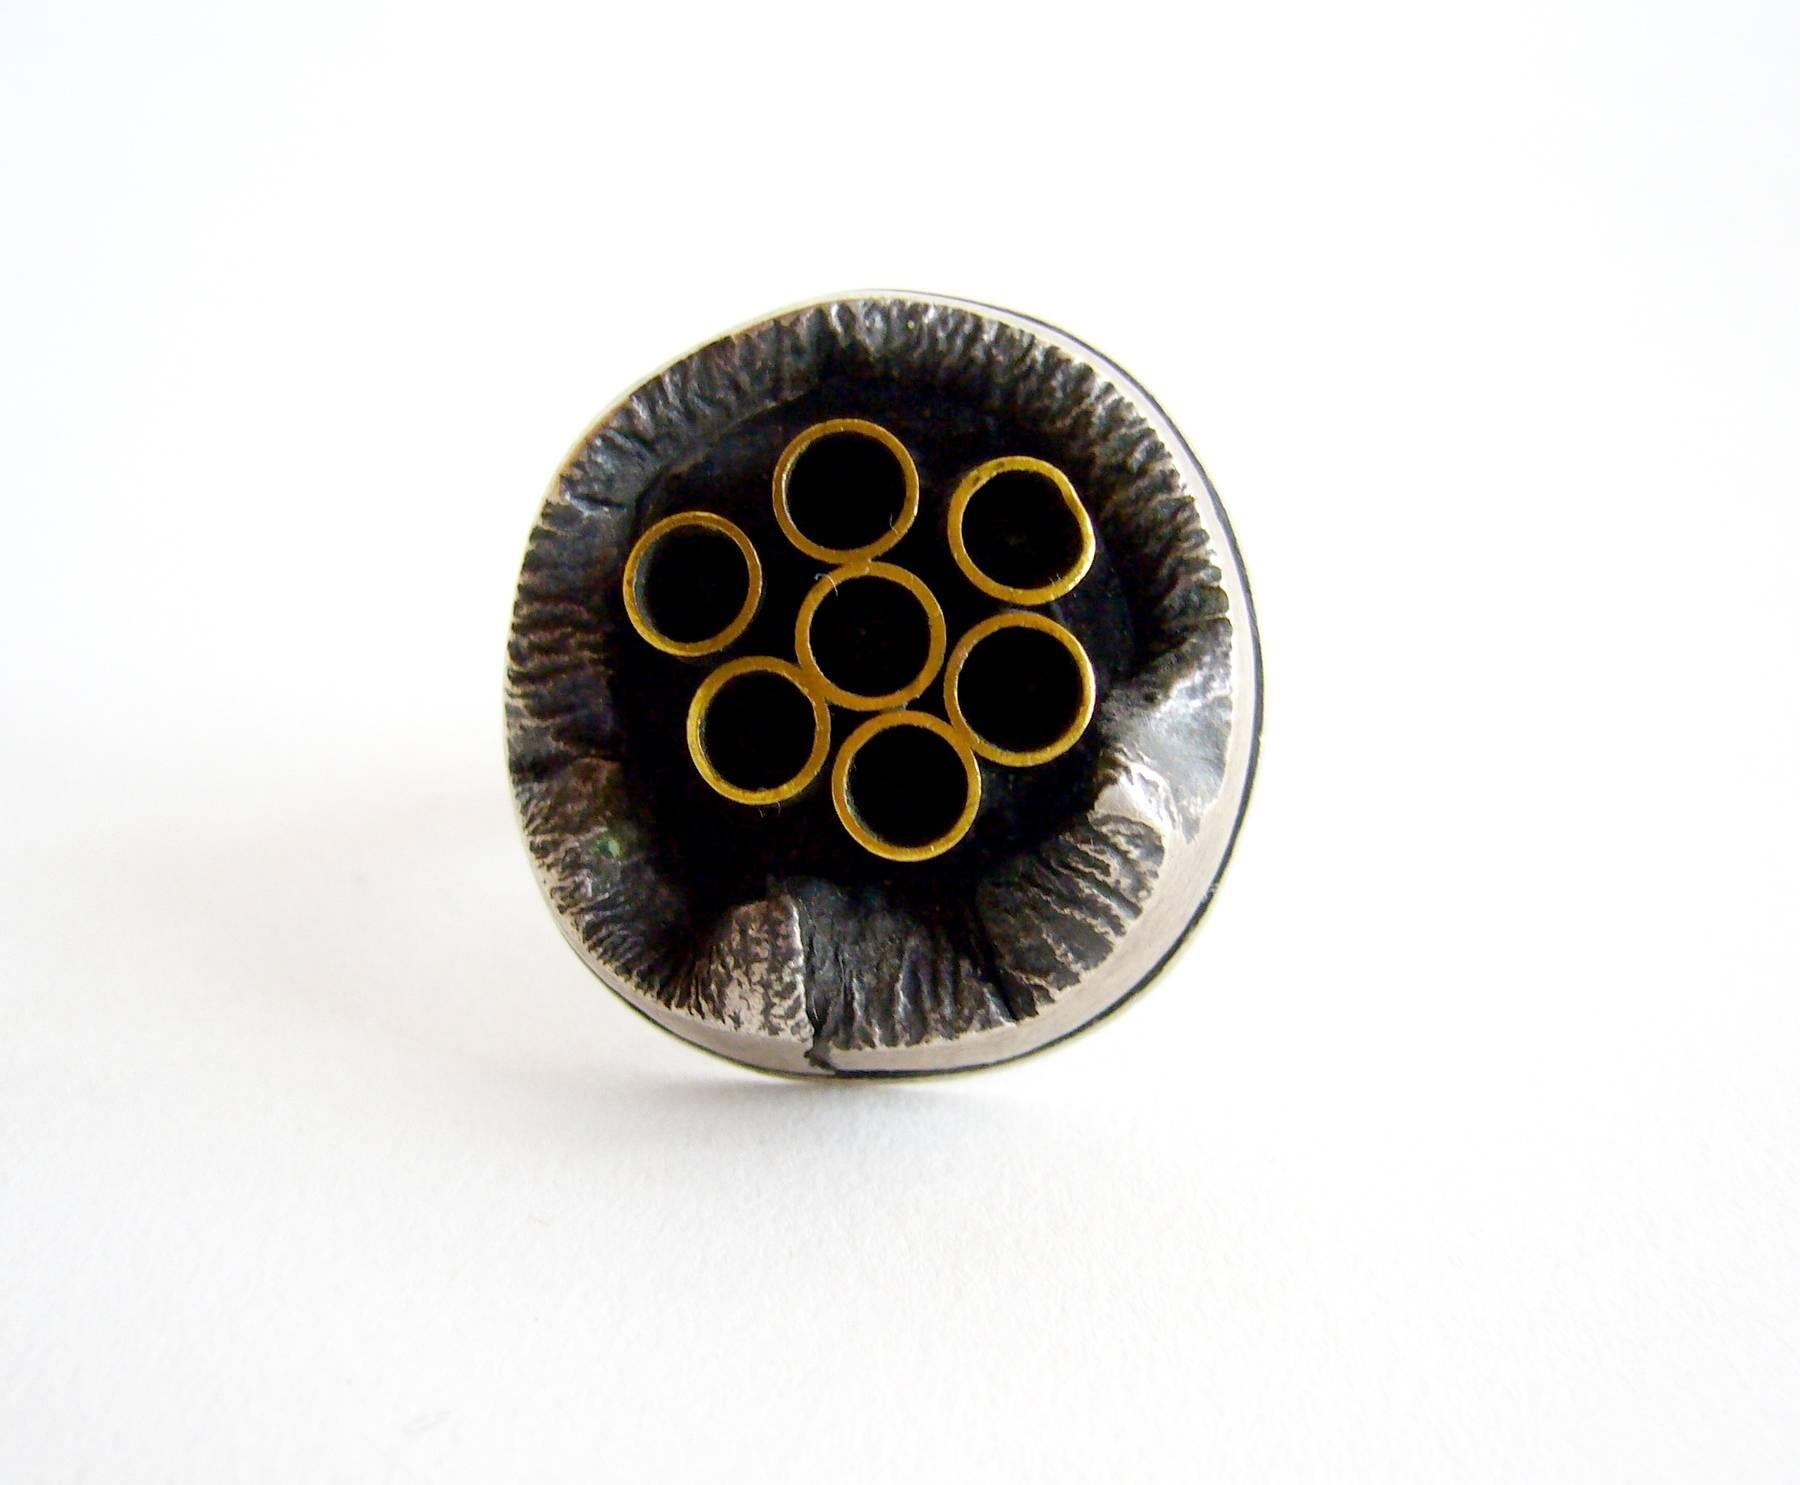 Sterling silver crater-like ring with brass tubes created by silversmith James Parker of San Diego, California.  Parker was an early member of the Allied Craftsmen of San Diego which started in the 1940's.  His jewelry was featured in the show 